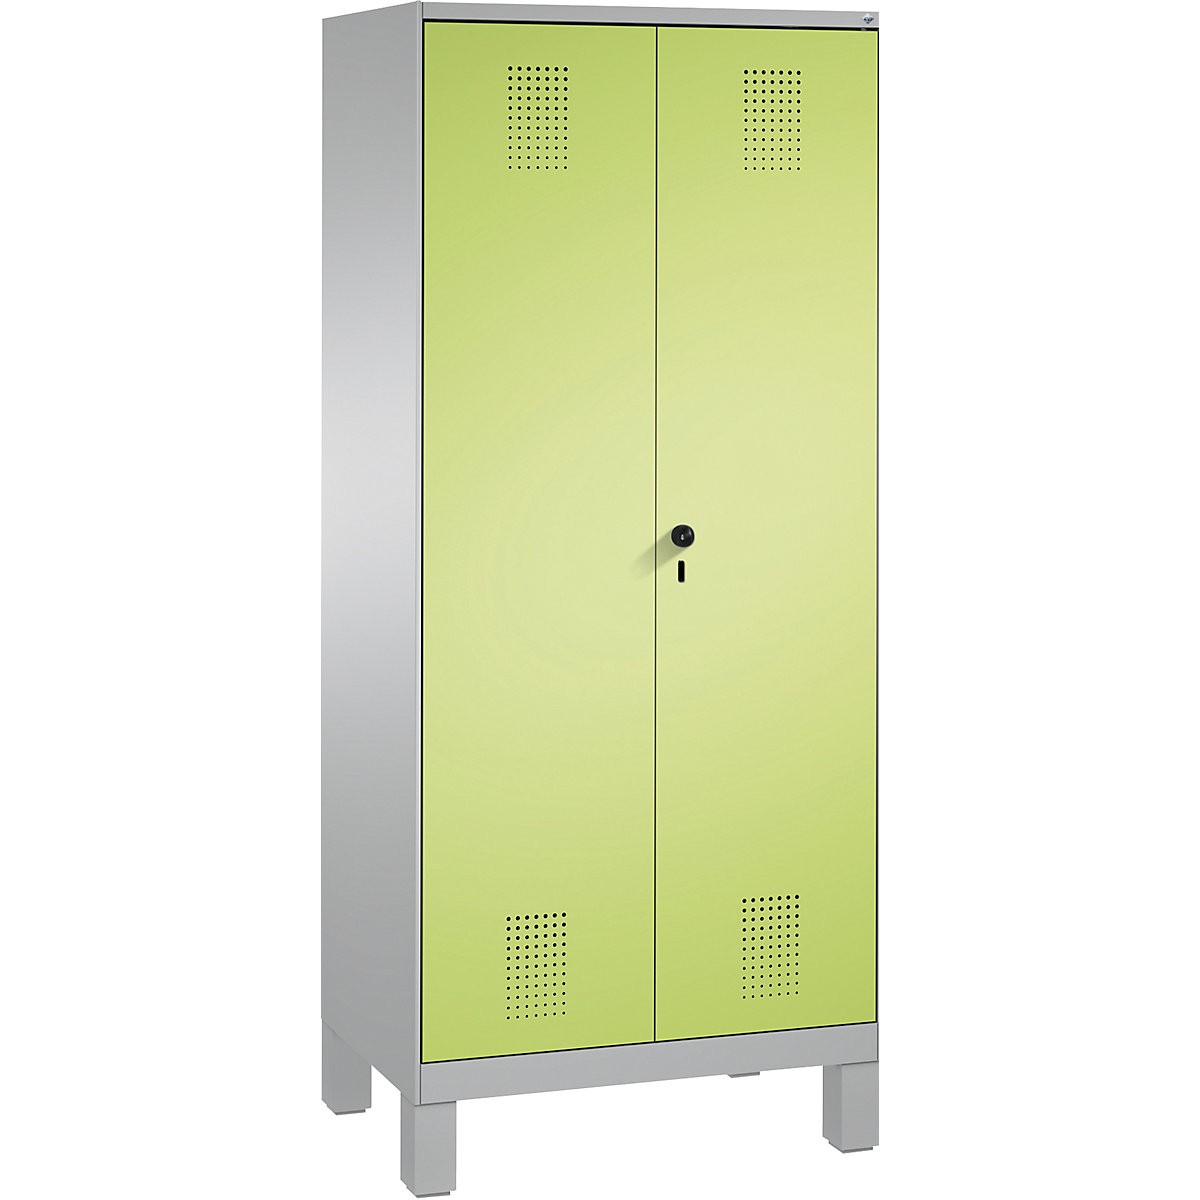 EVOLO storage cupboard, doors close in the middle, with feet – C+P, 2 compartments, 8 shelves, compartment width 400 mm, white aluminium / viridian green-11